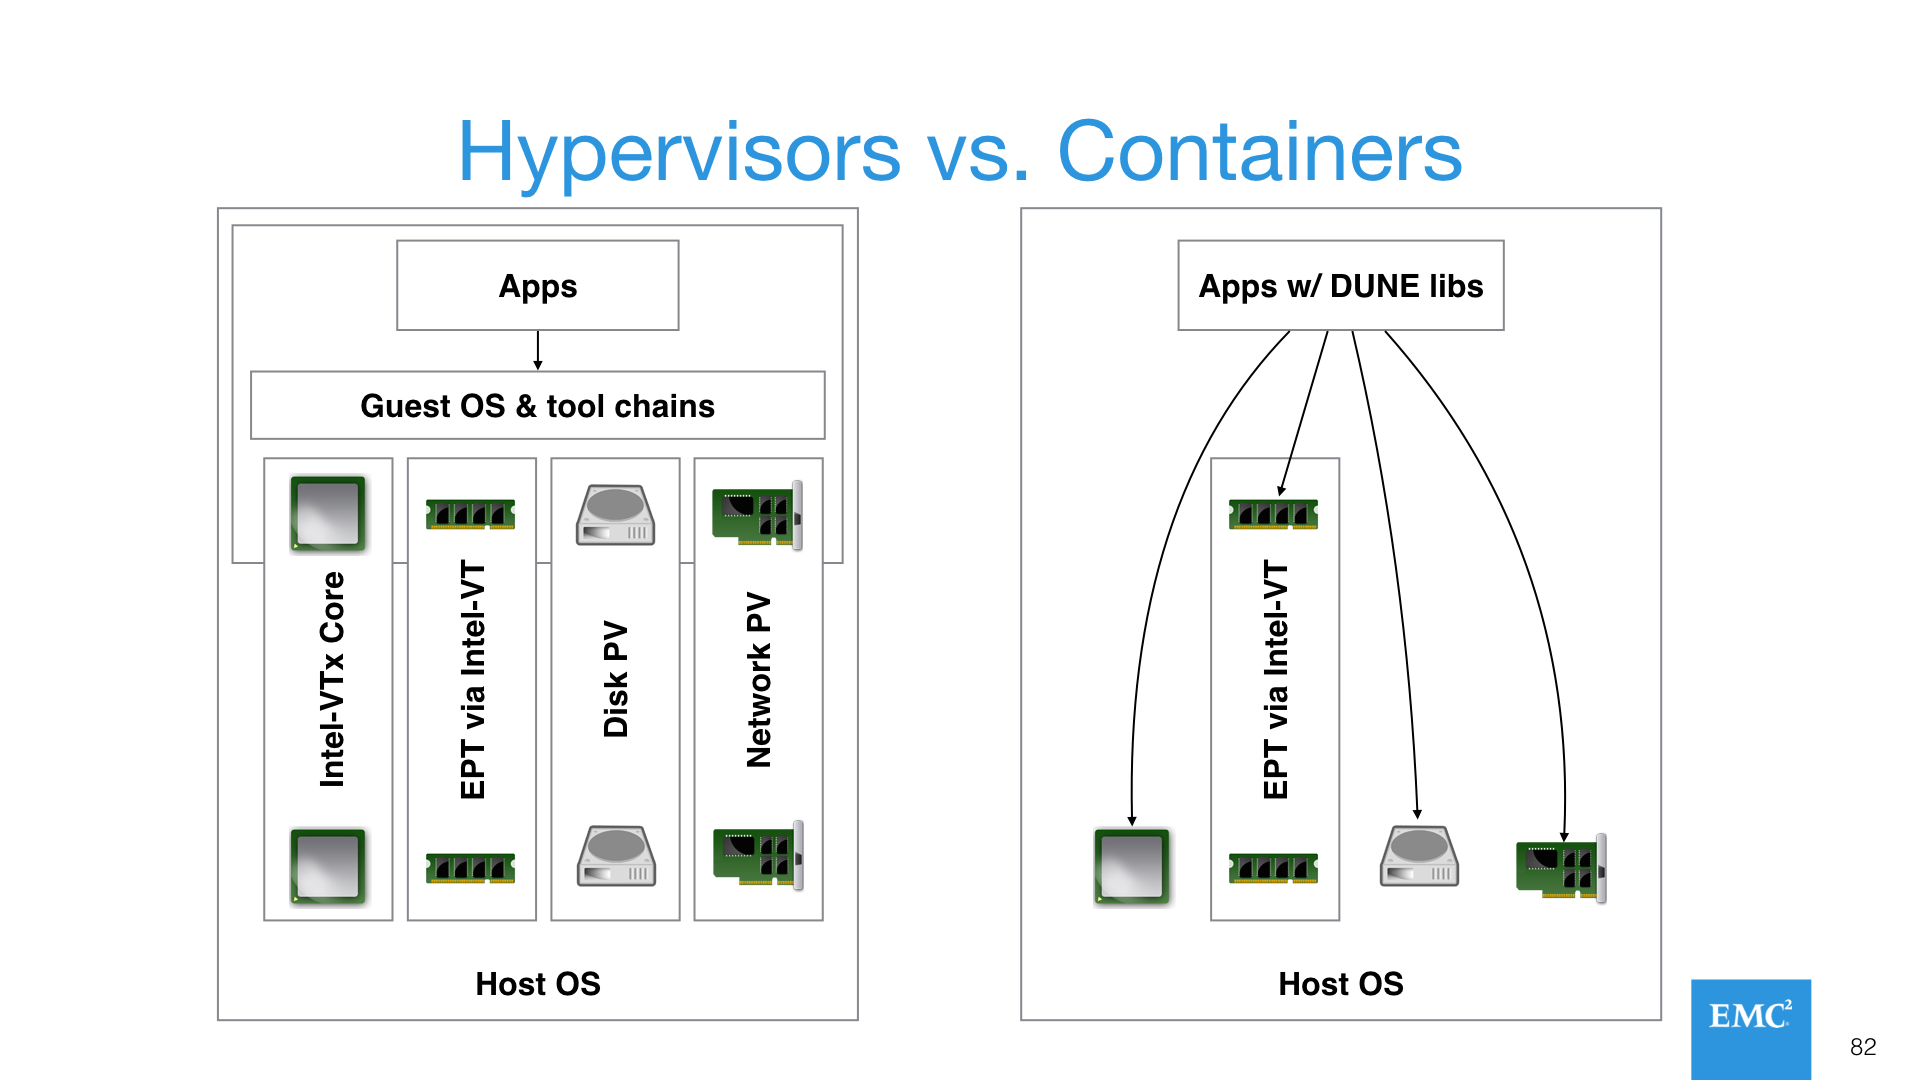 Hypervisors vs. Containers